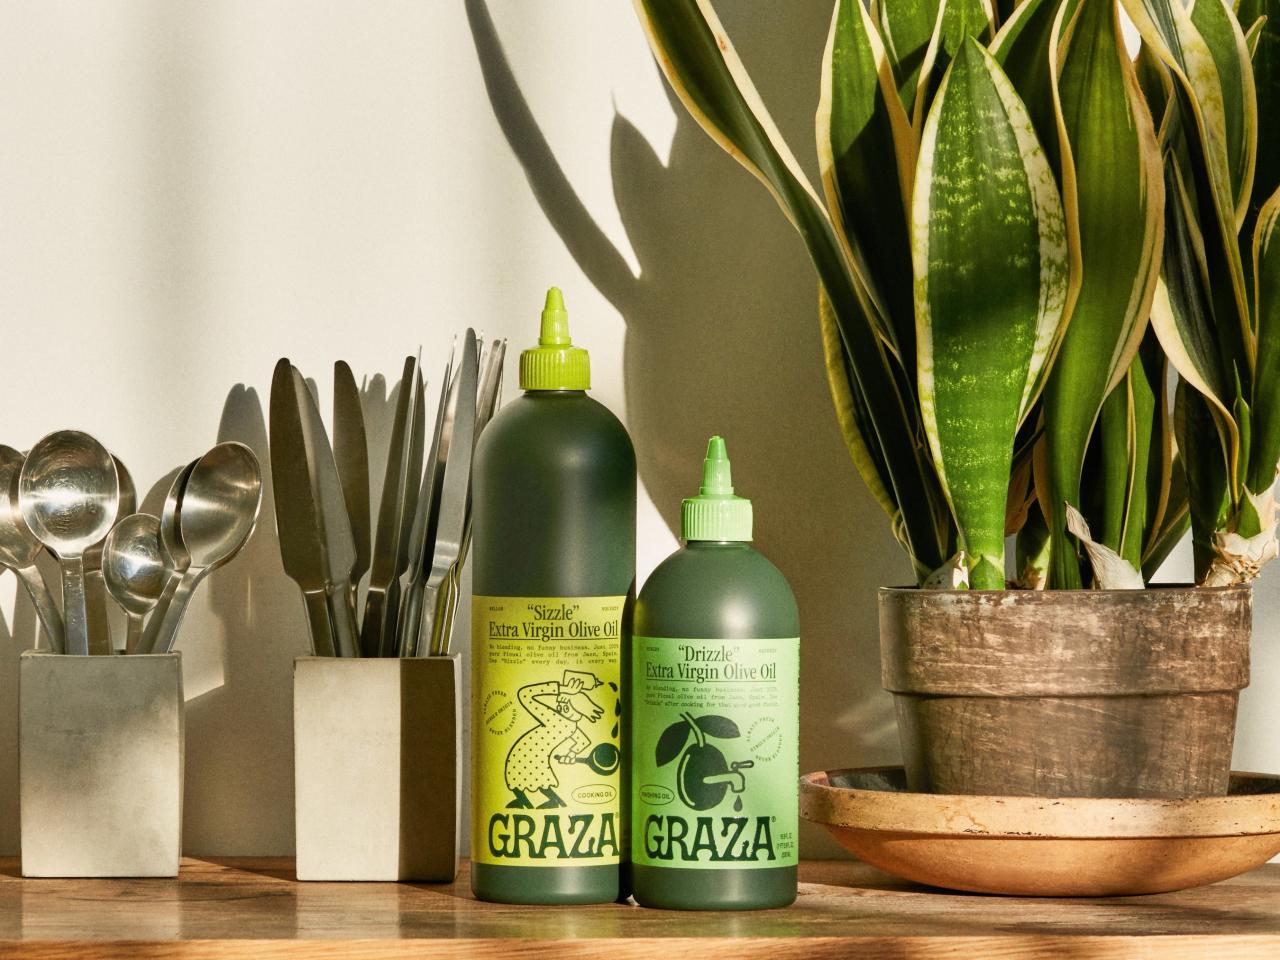 Graza debuts premium, affordable olive oil in squeeze bottle format